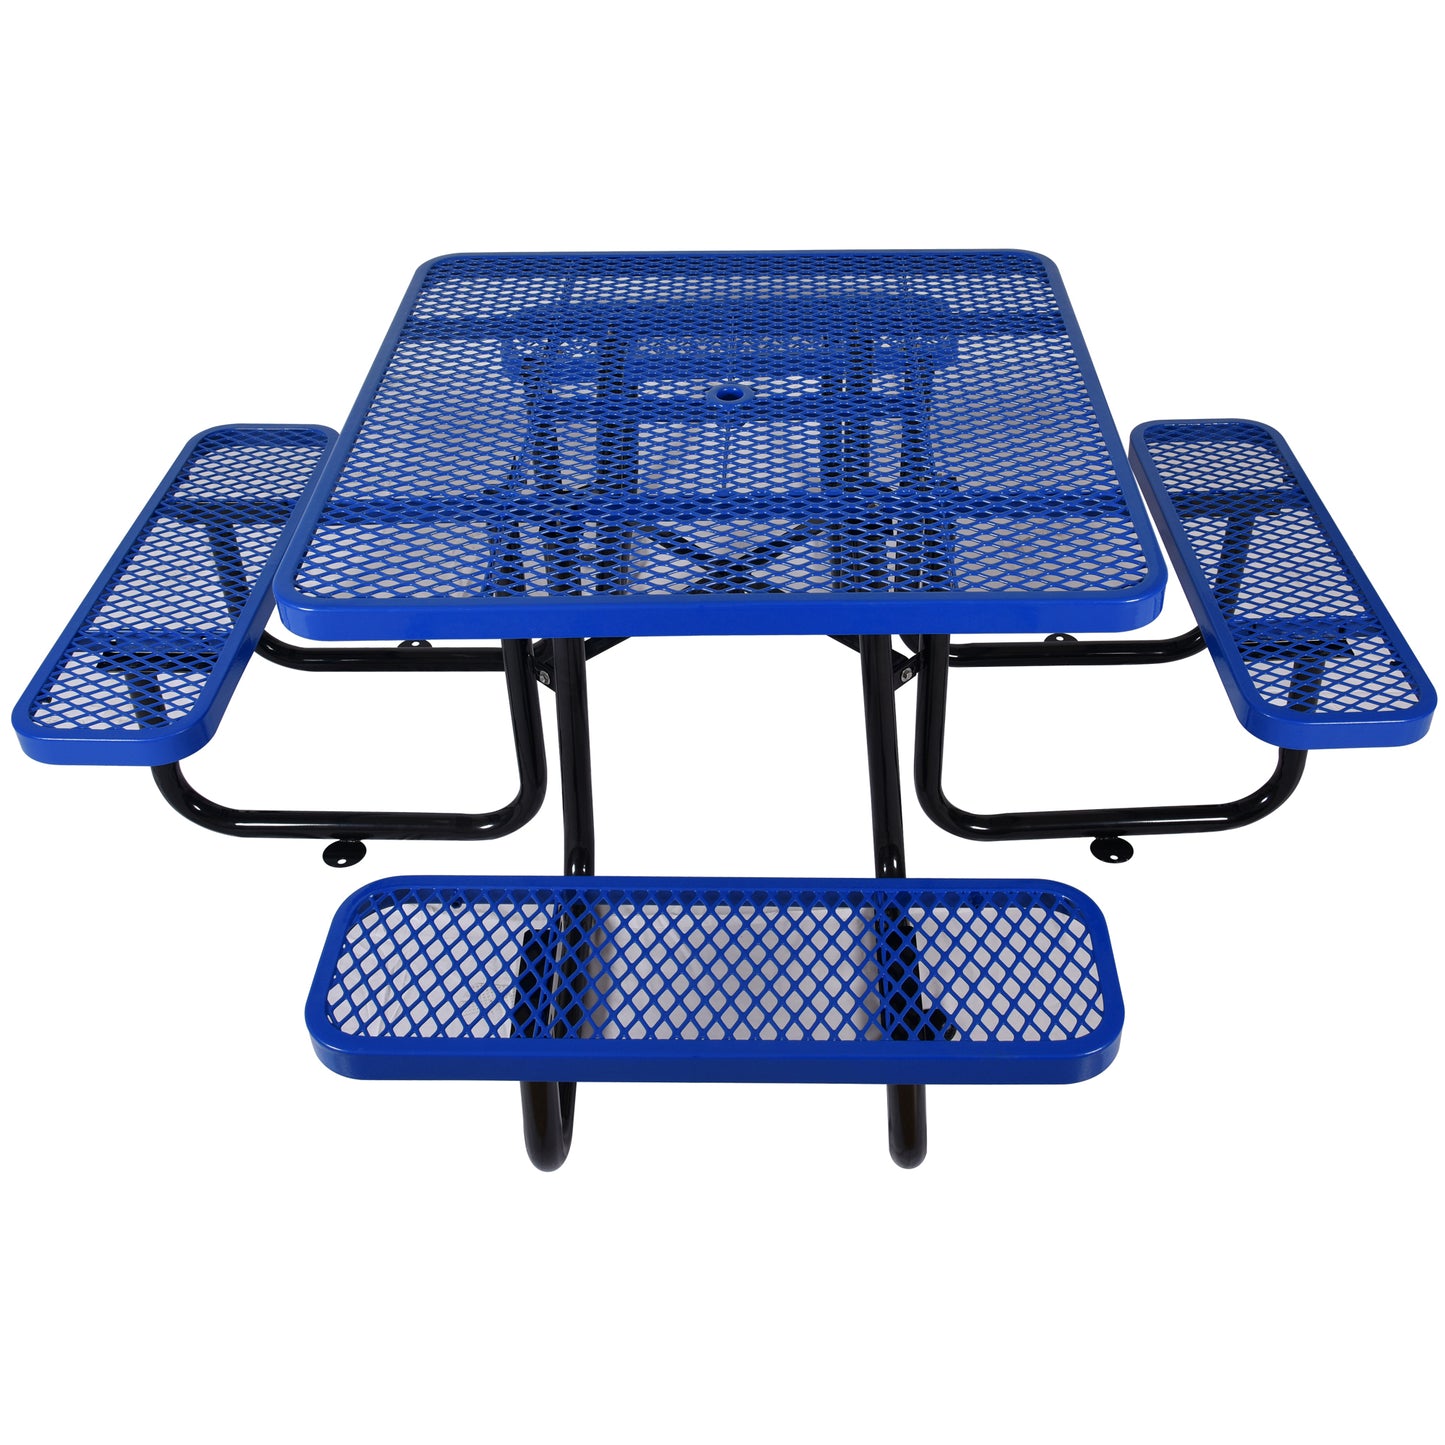 Square Outdoor Steel Picnic Table 46" blue ,with umbrella pole